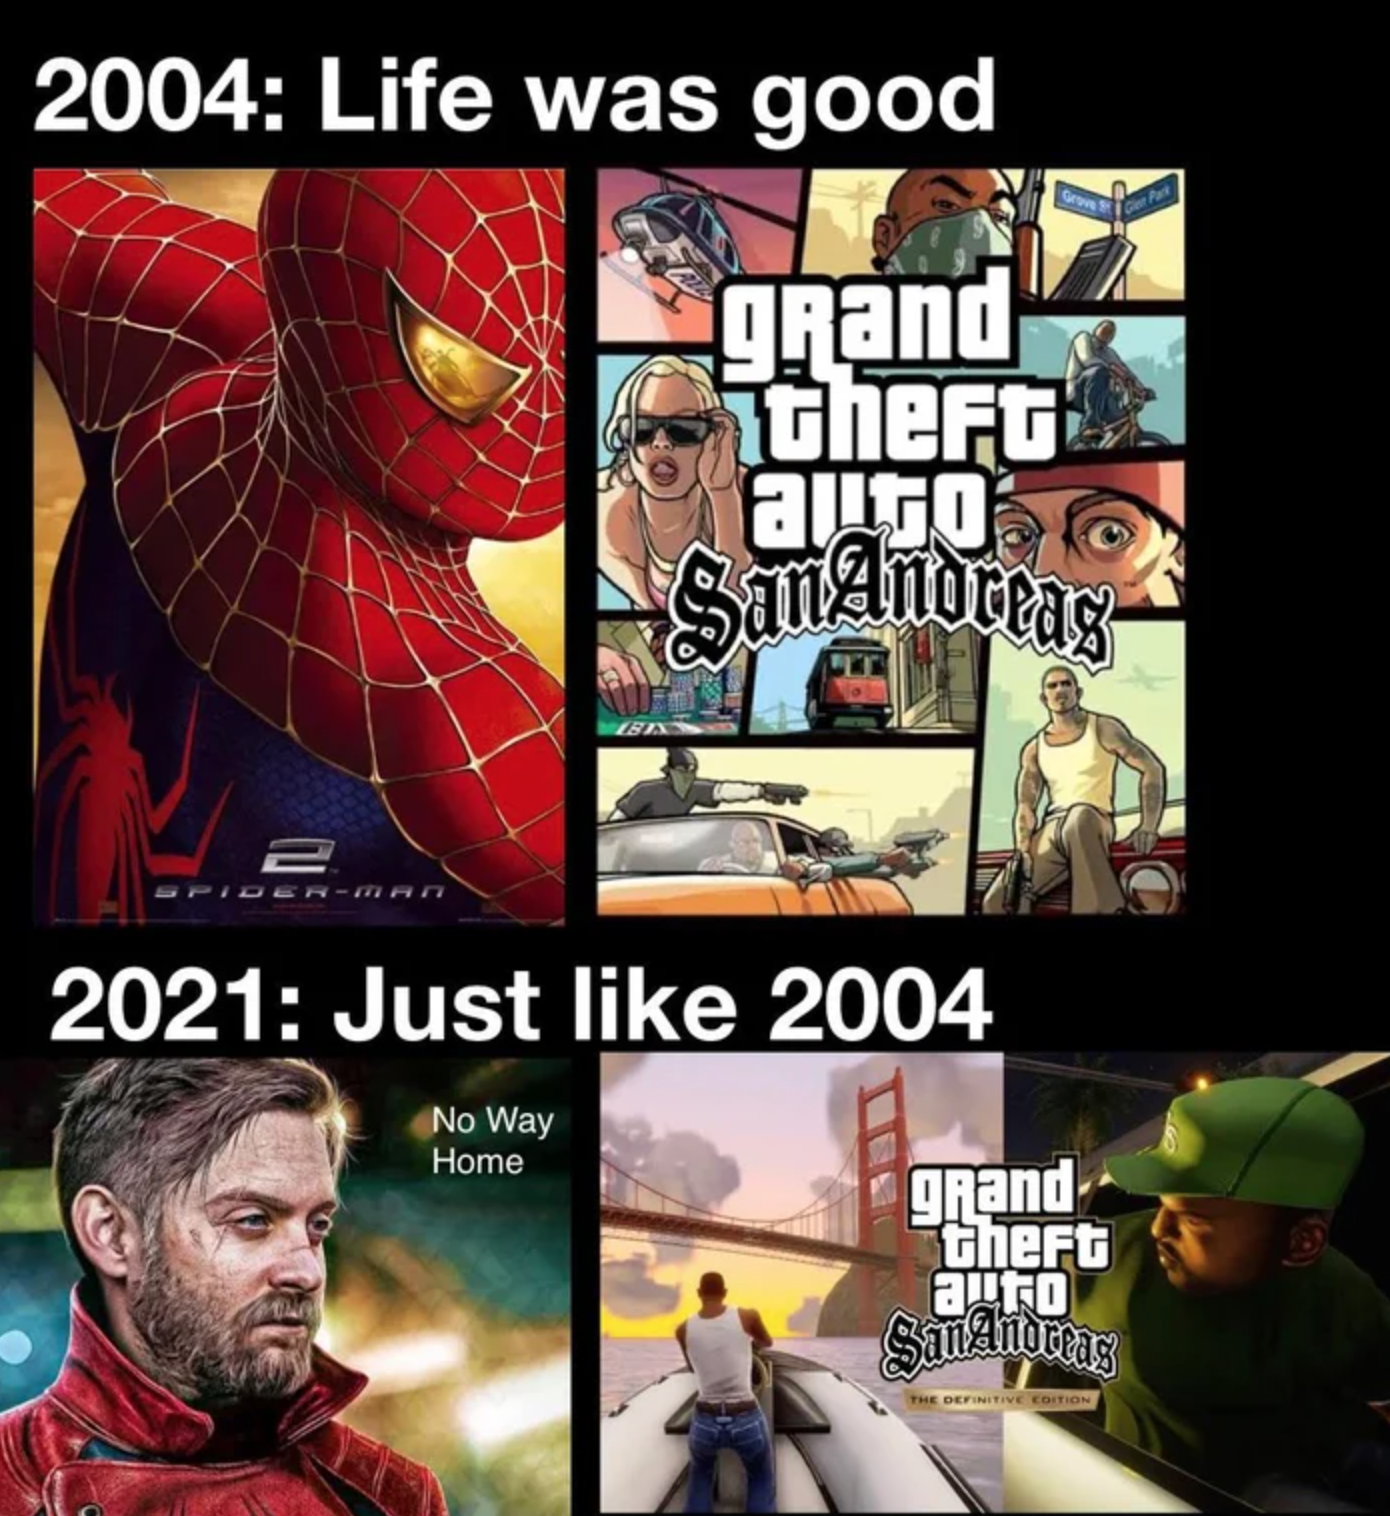 funny gaming memes - 2004 Life was good grand theft! auto San Andreas For 2021 Just 2004 No Way Home grand theft auro San Andreas